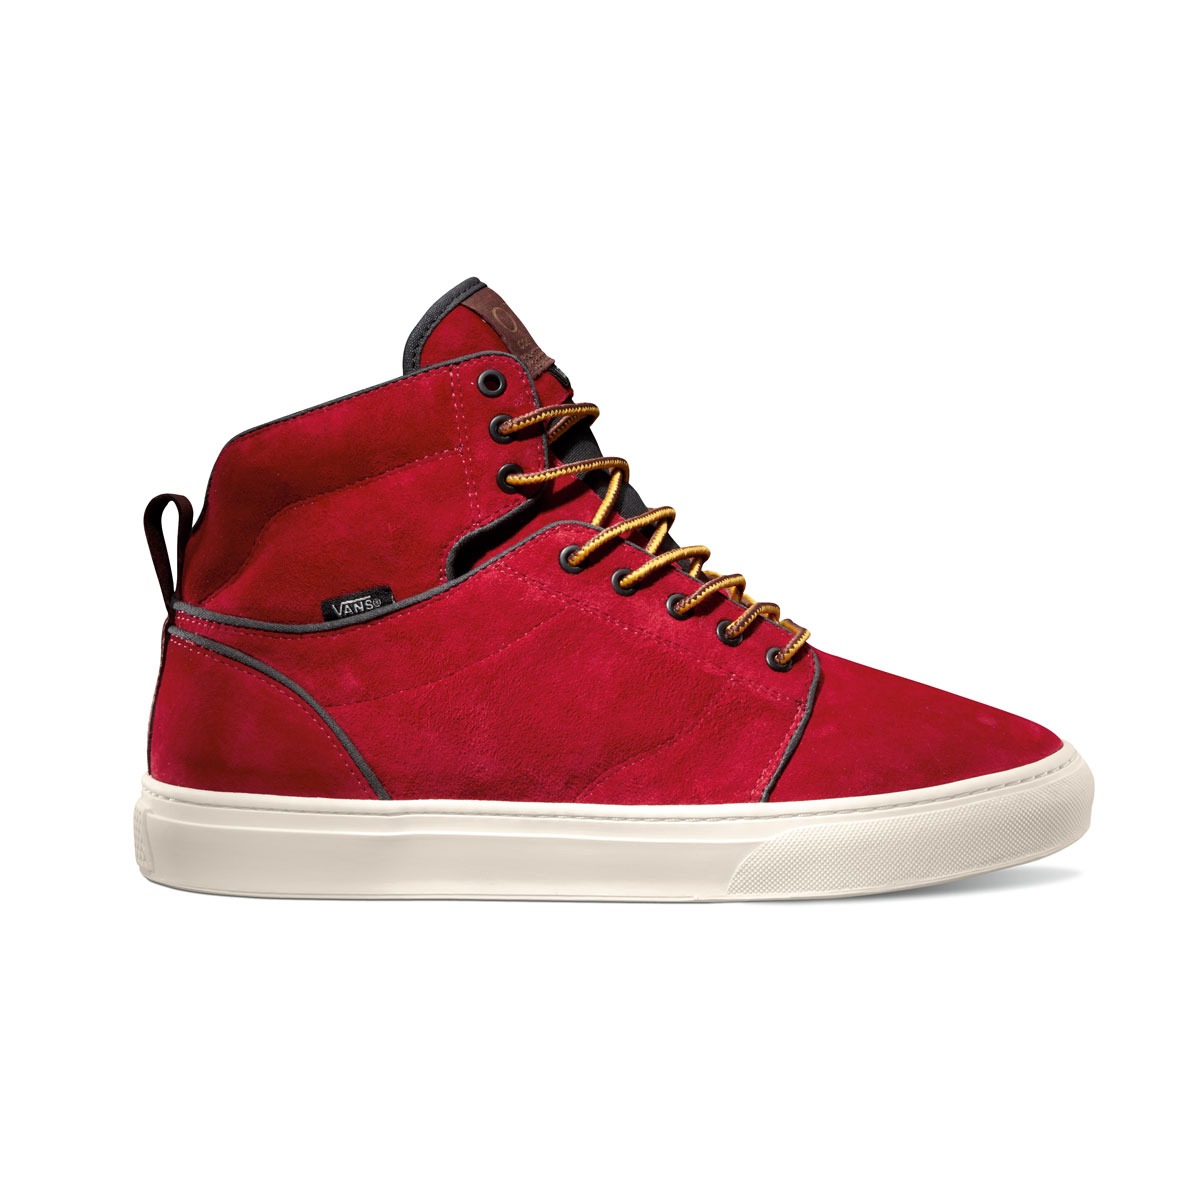 Vans OTW Collection Alomar Boot Red Turtledove Fall 2013